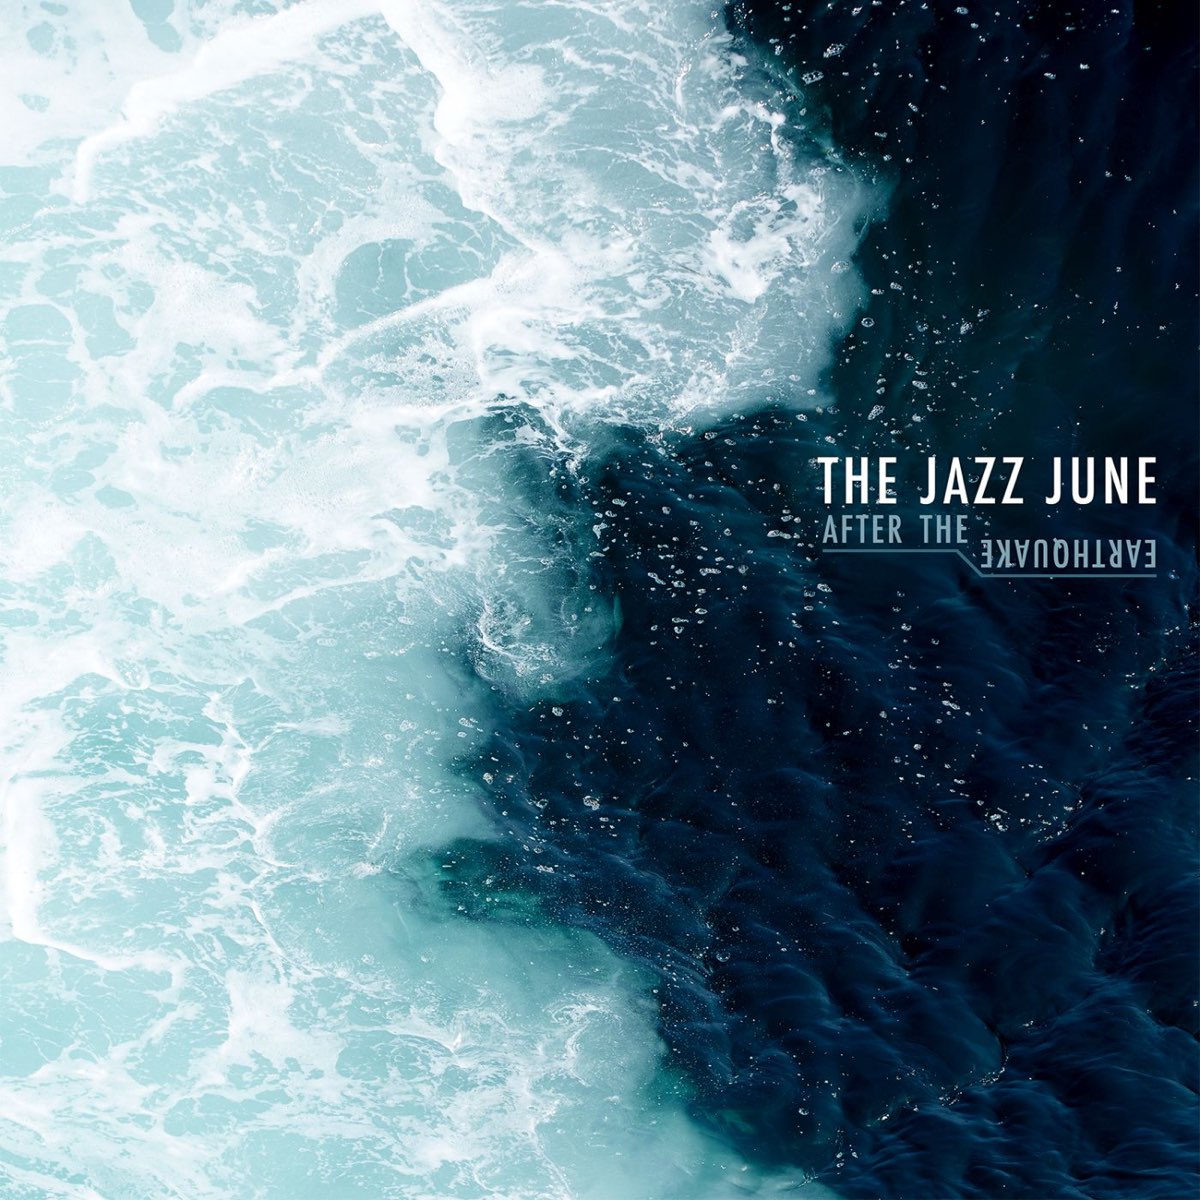 After The Earthquake / The Jazz June